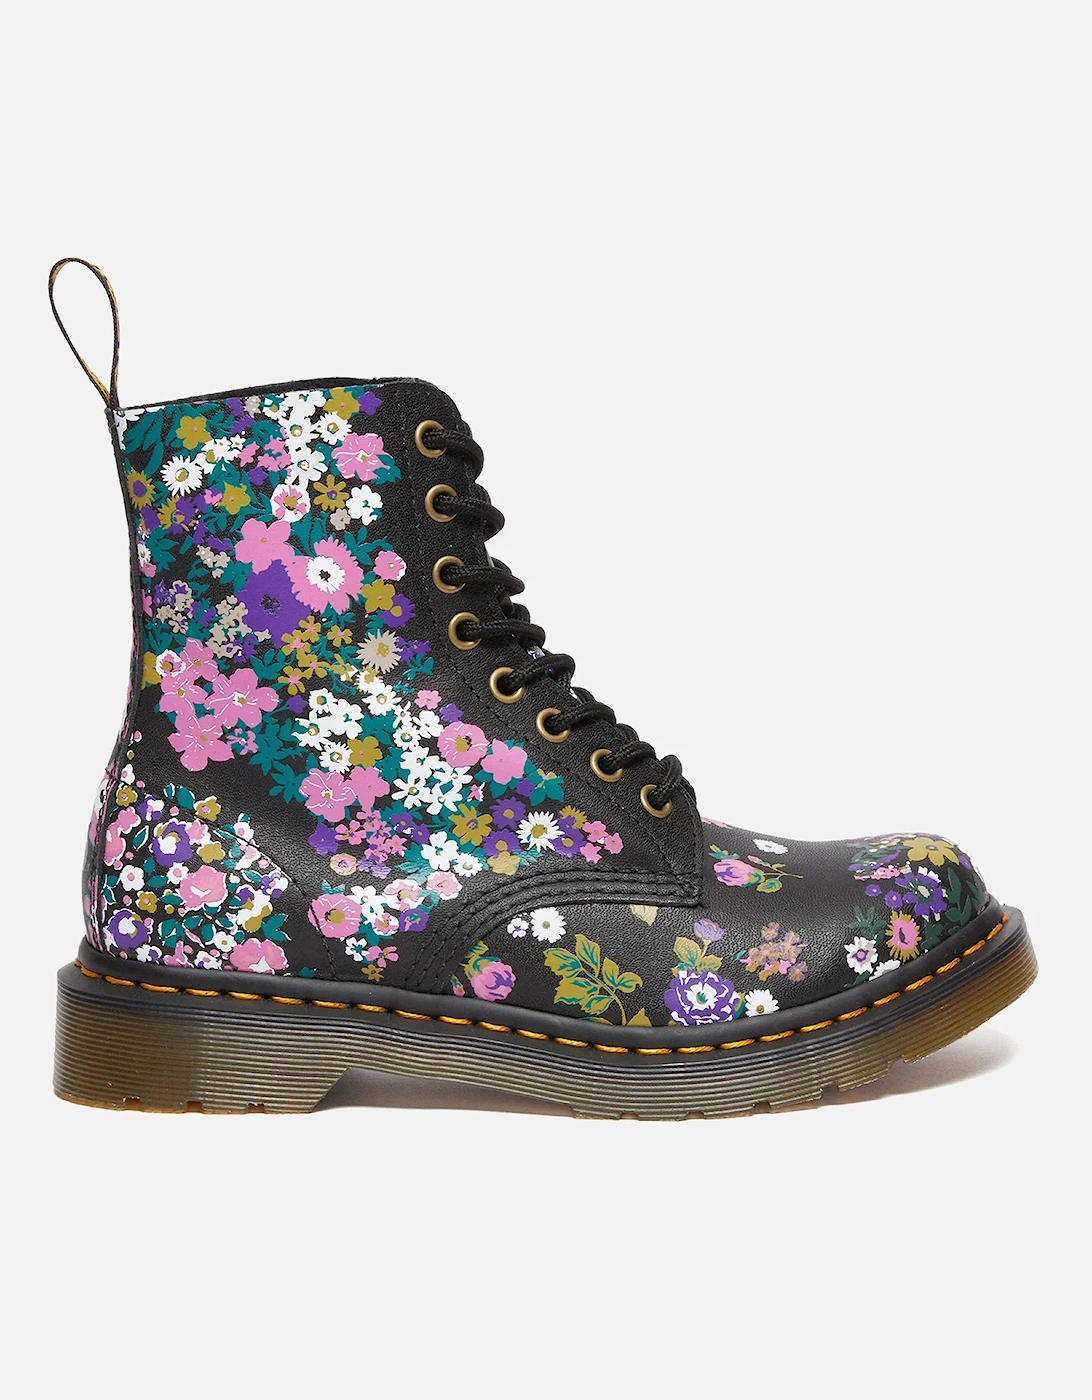 Dr. Martens Women's 1460 Pascal Leather 8-Eye Boots - Dr. Martens - Home - Dr. Martens Women's 1460 Pascal Leather 8-Eye Boots, 2 of 1